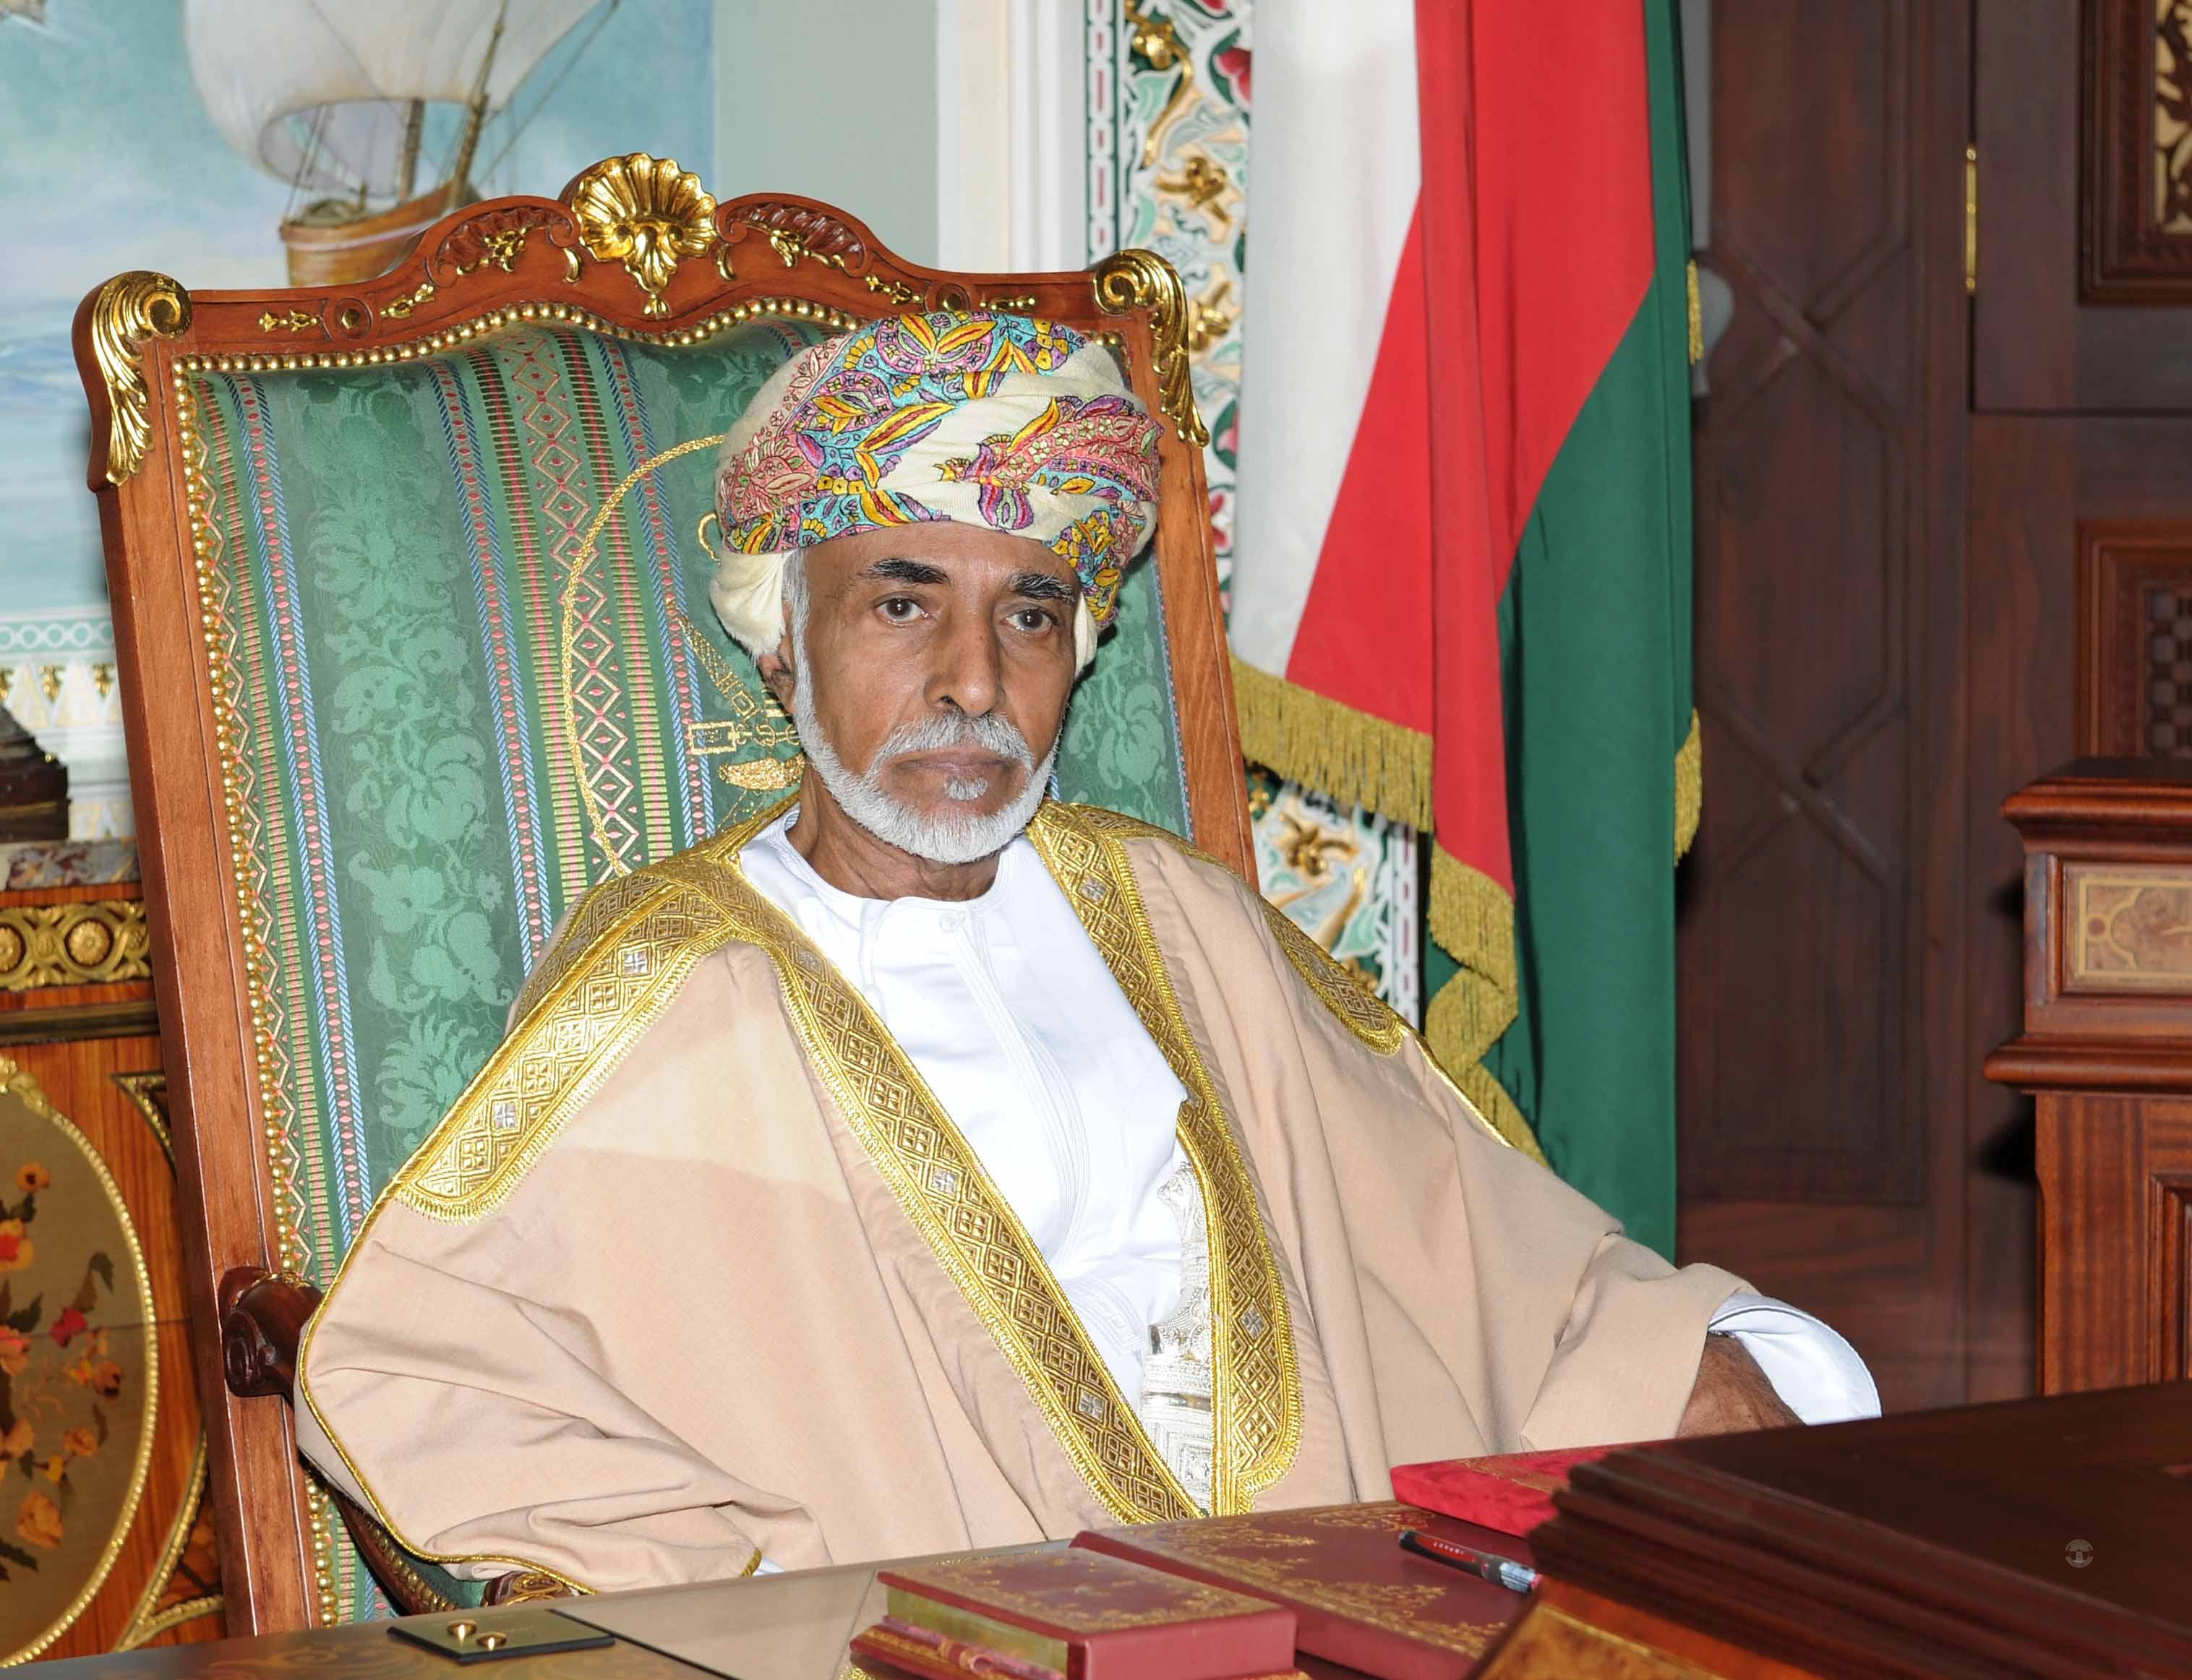 His Majesty Sultan Qaboos sends greetings to Cambodia